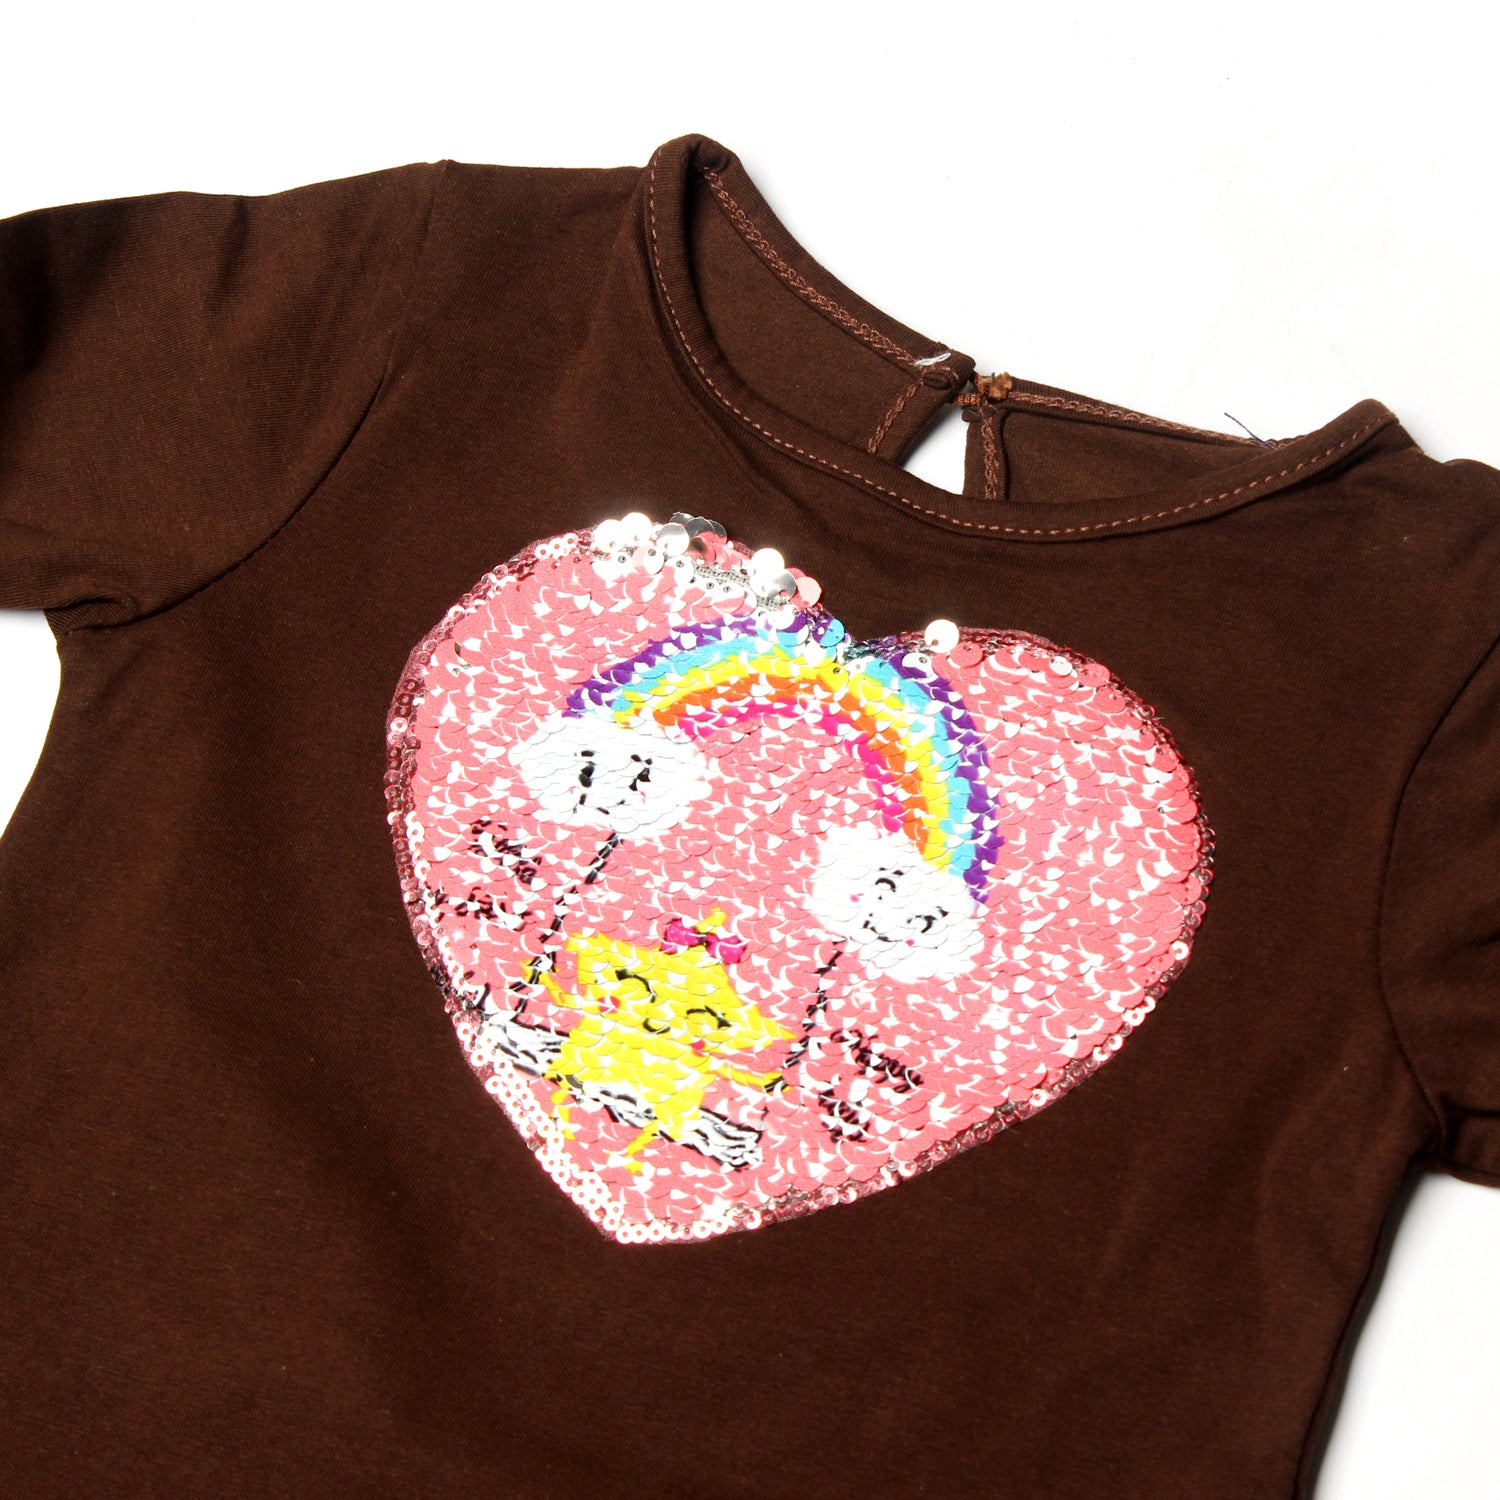 BROWN HEART PRINTED FULL SLEEVES T-SHIRTS TOP